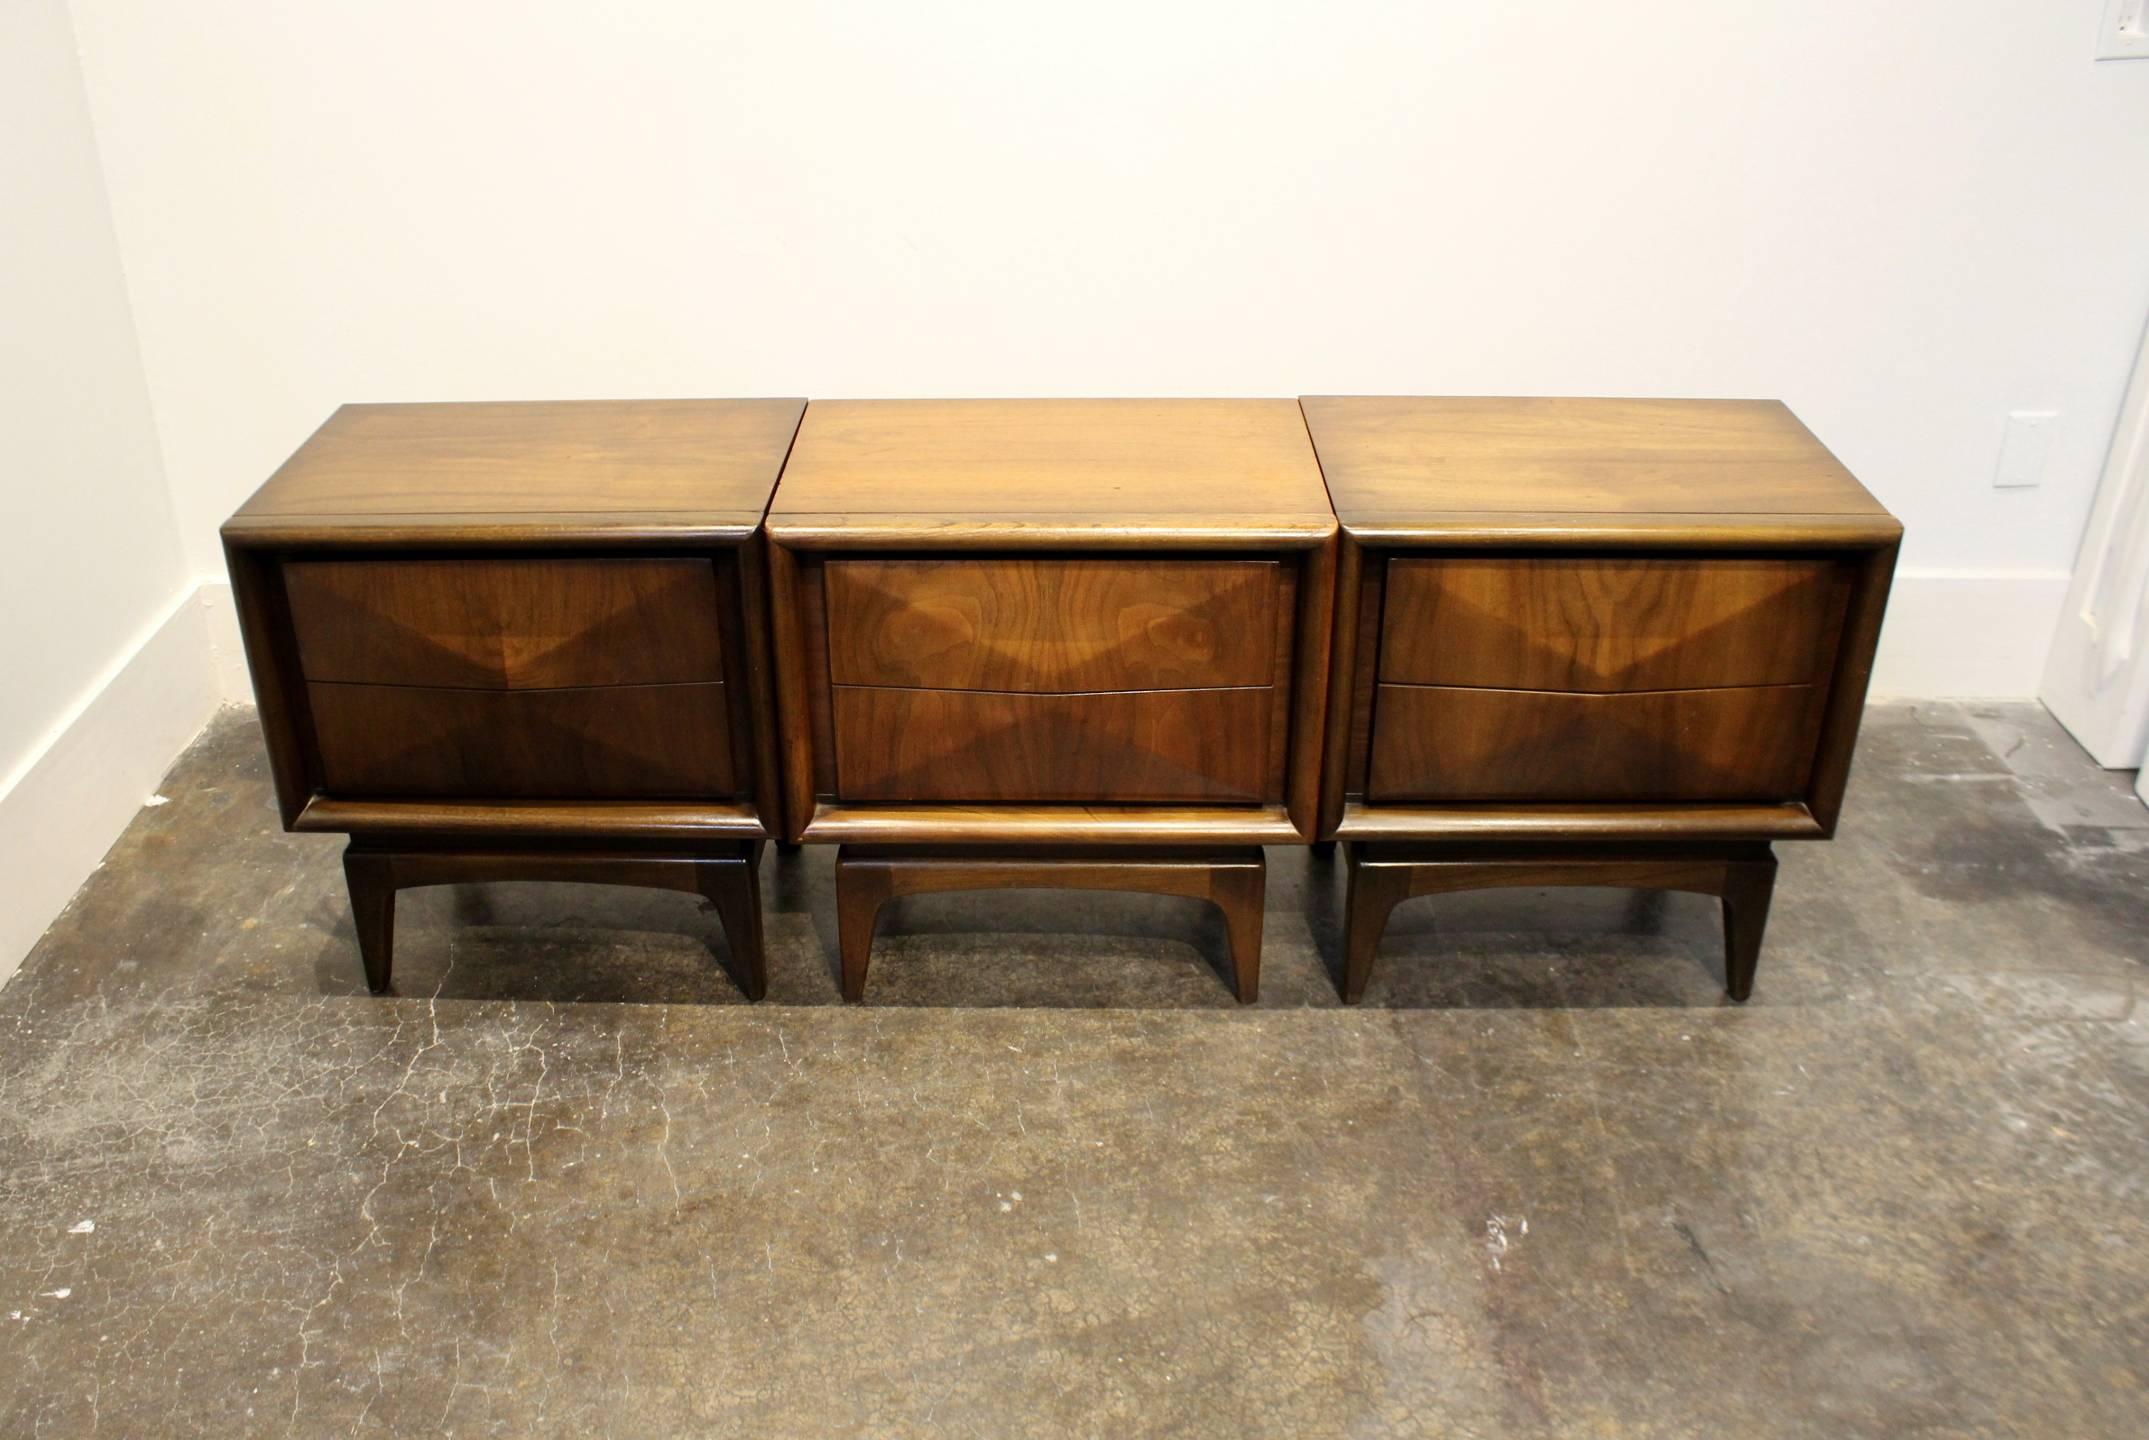 One of the most iconic designs of the era! Beautiful diamond-shaped front with two bevelled drawers, glowing walnut wood, tapered feet. Selling individually or as a lot. Buy one to complete a pair or all three to make a modular dresser.